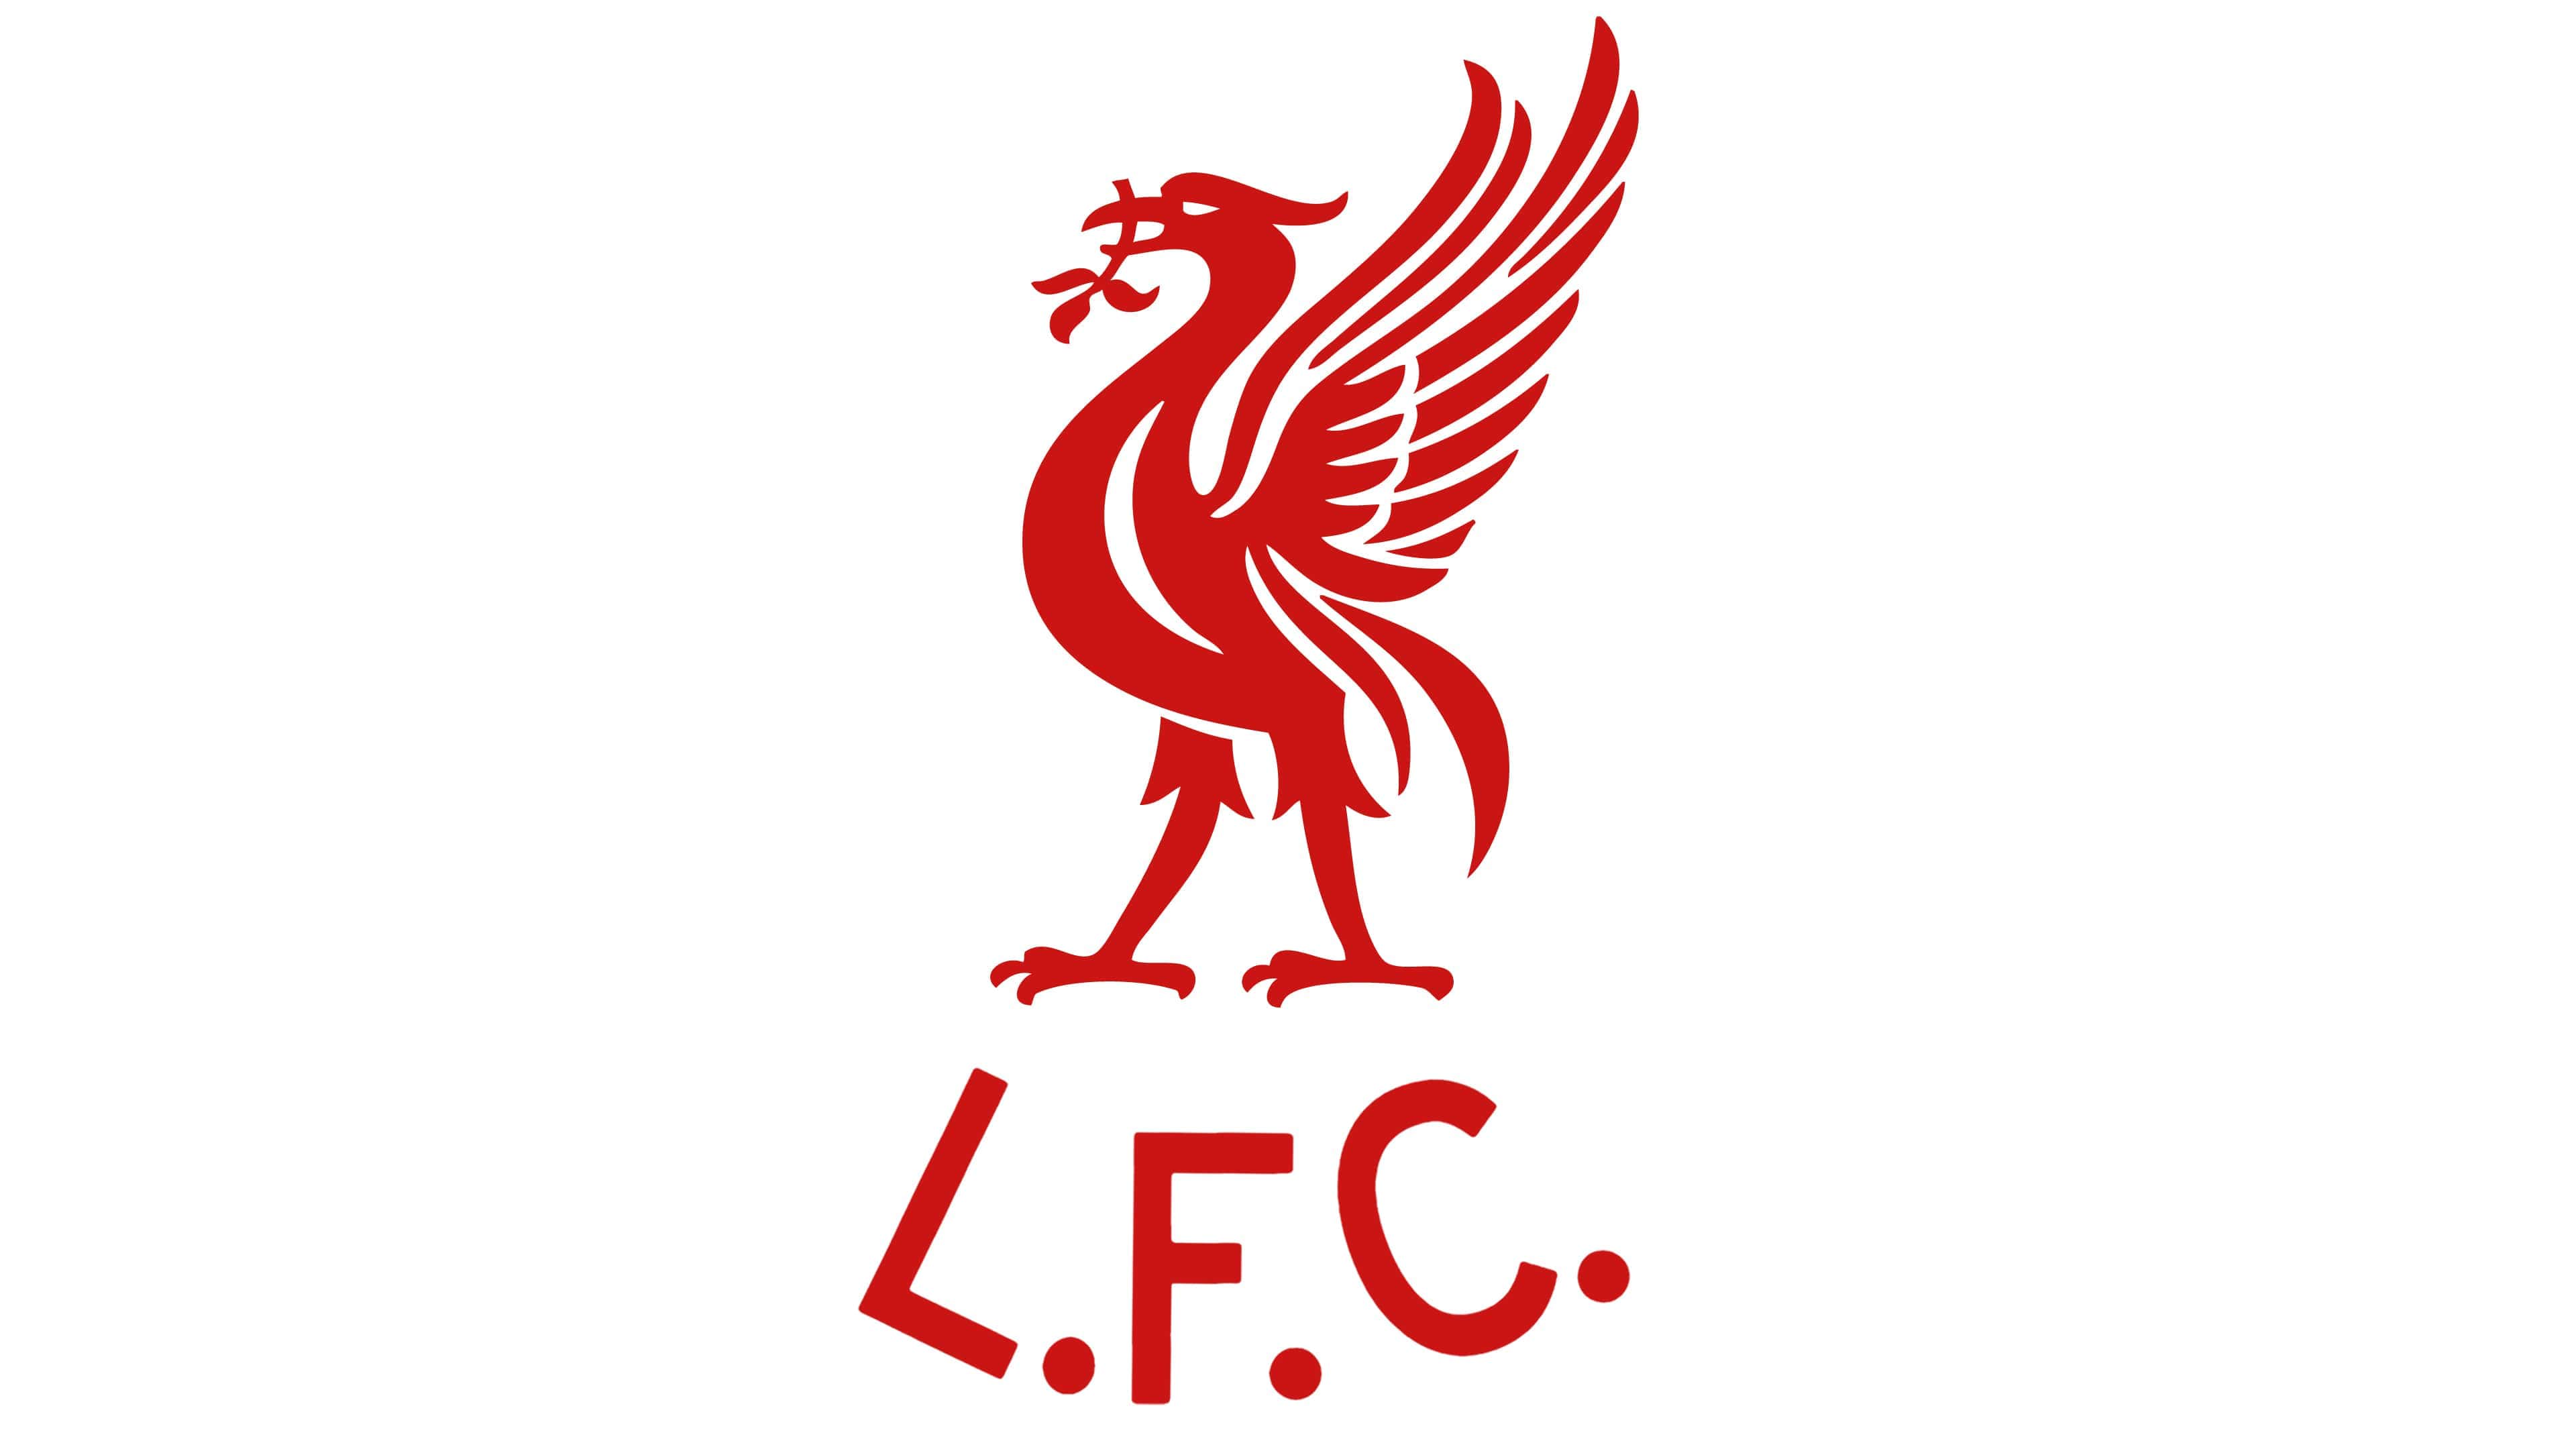 The Crest Of The Reds: A Look At The Liverpool Logo History